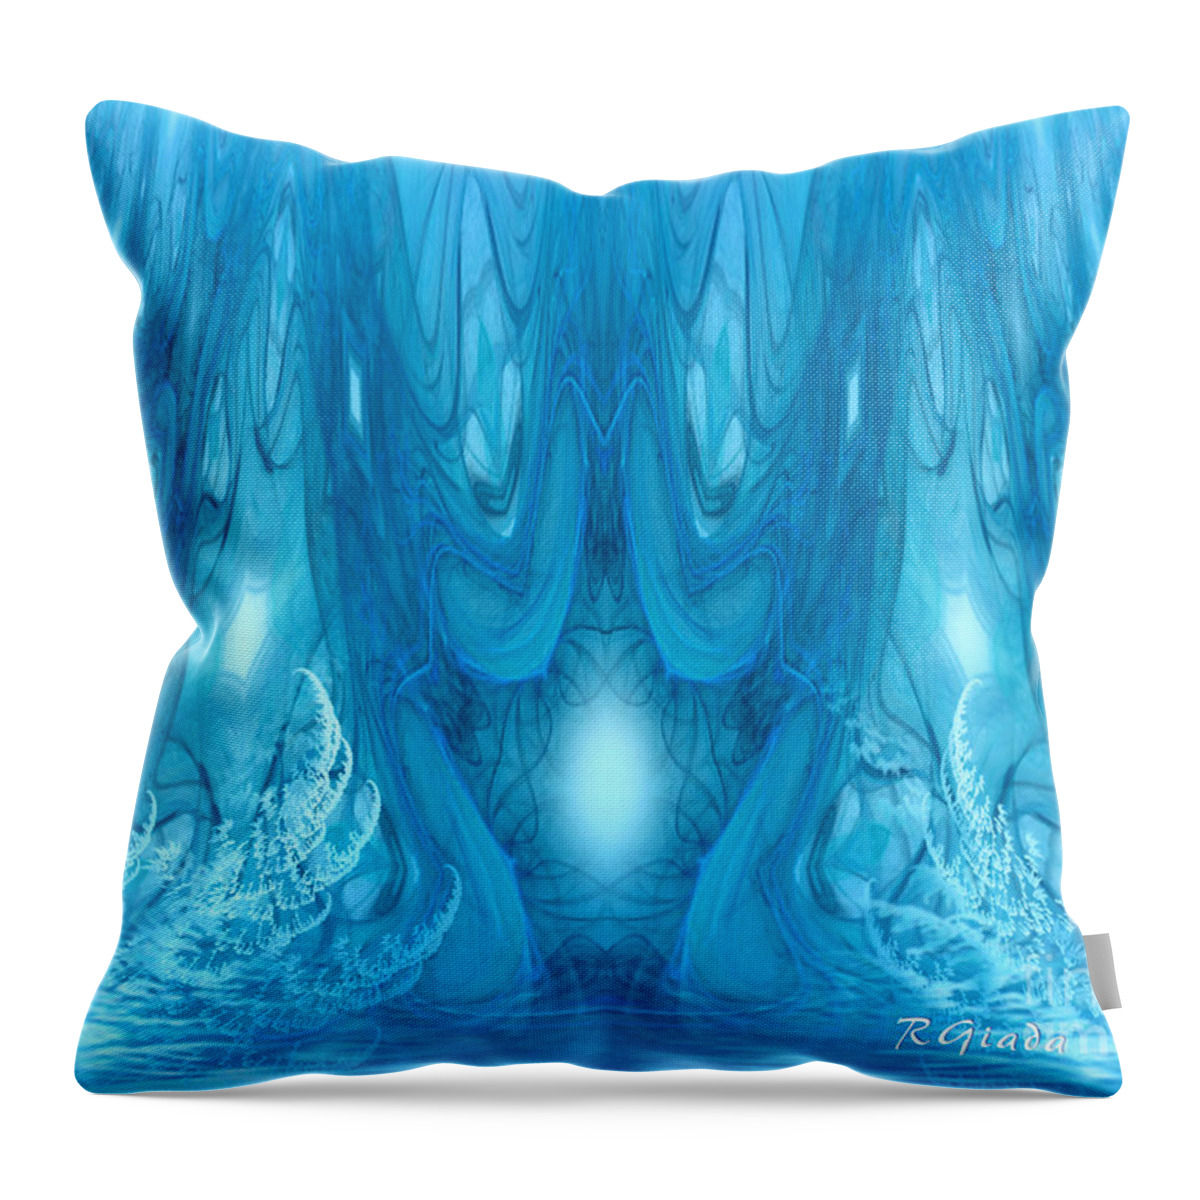 The Snow Queen's Castle Throw Pillow featuring the digital art The Snow Queen's Castle - fantasy art by Giada Rossi by Giada Rossi